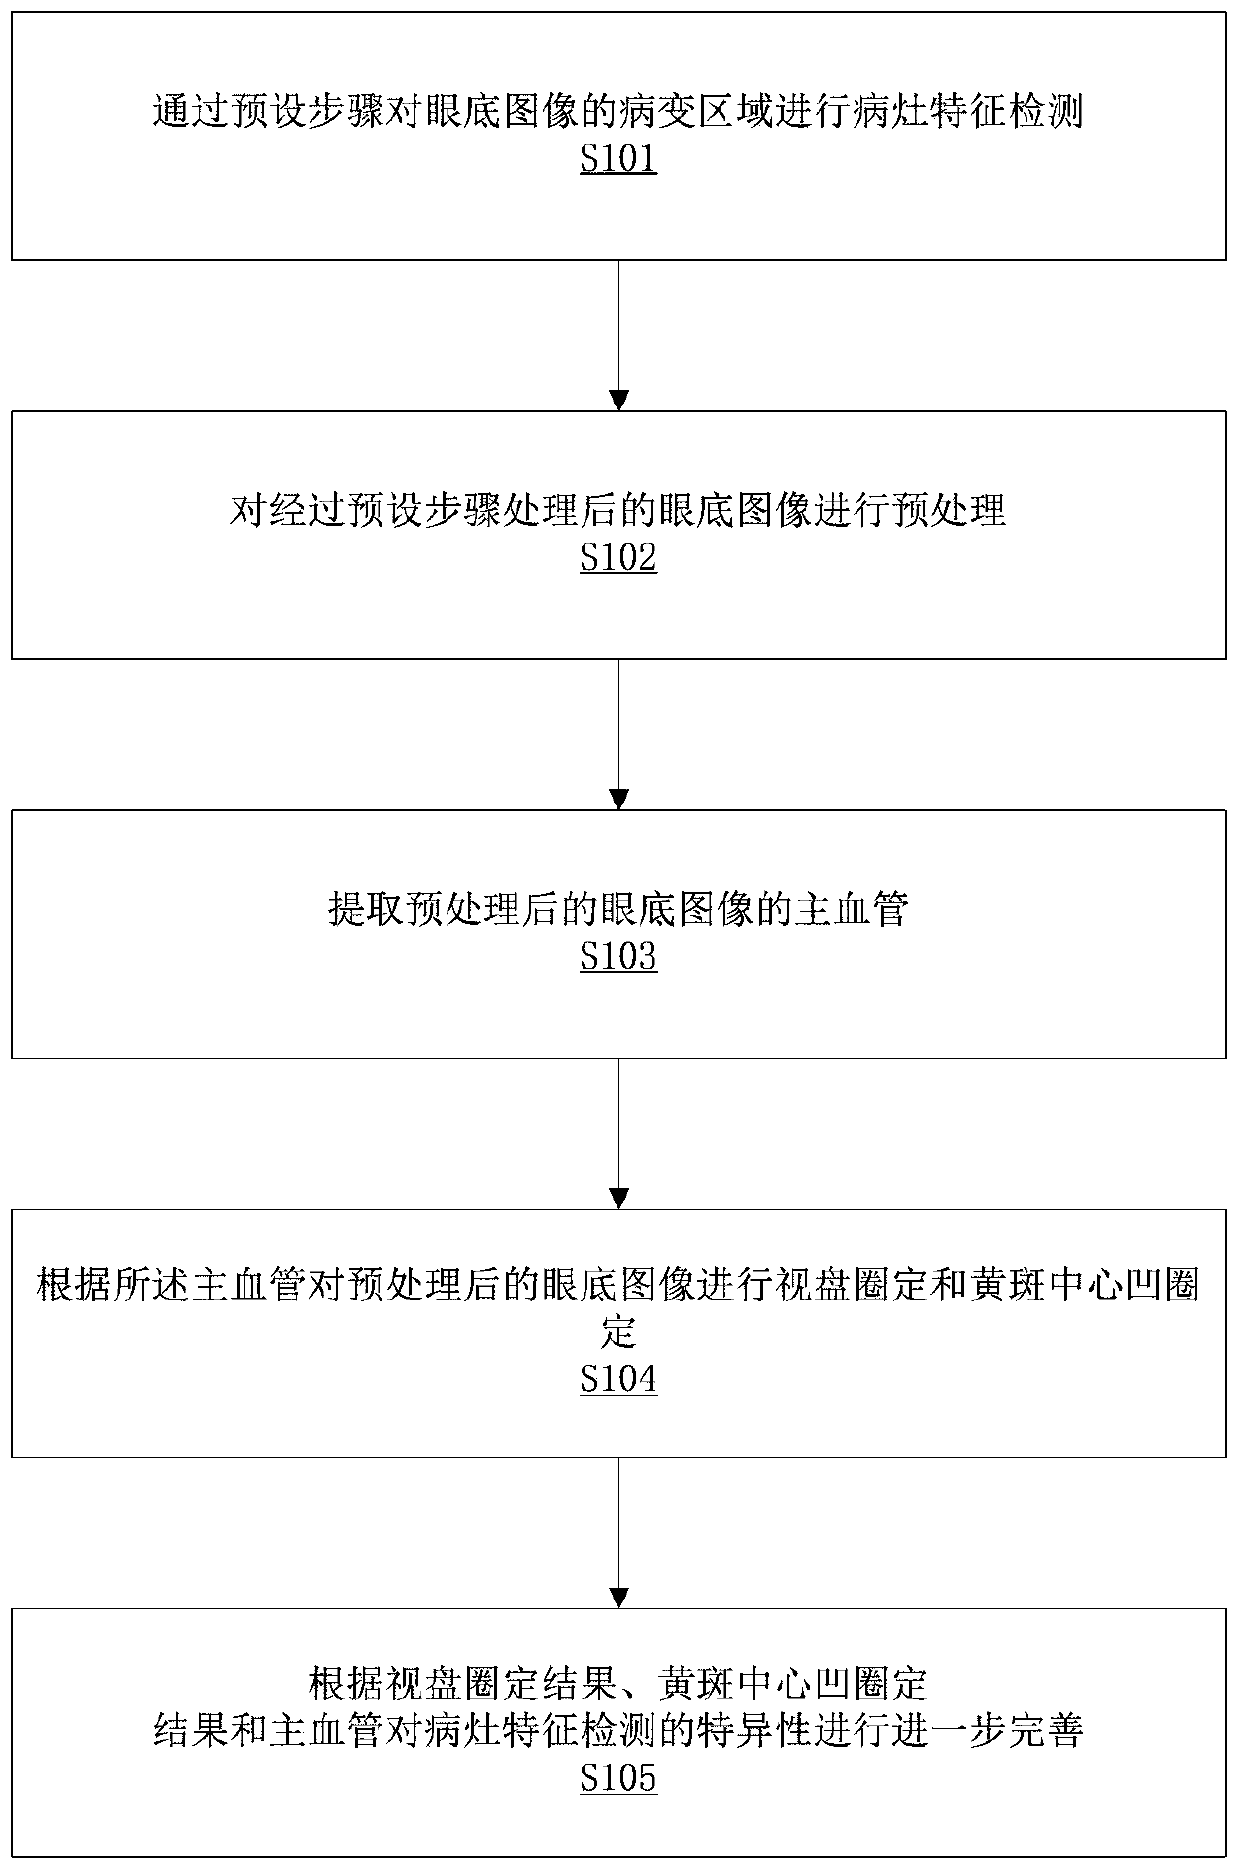 High-specificity diabetic retinopathy characteristic detection method and storage equipment